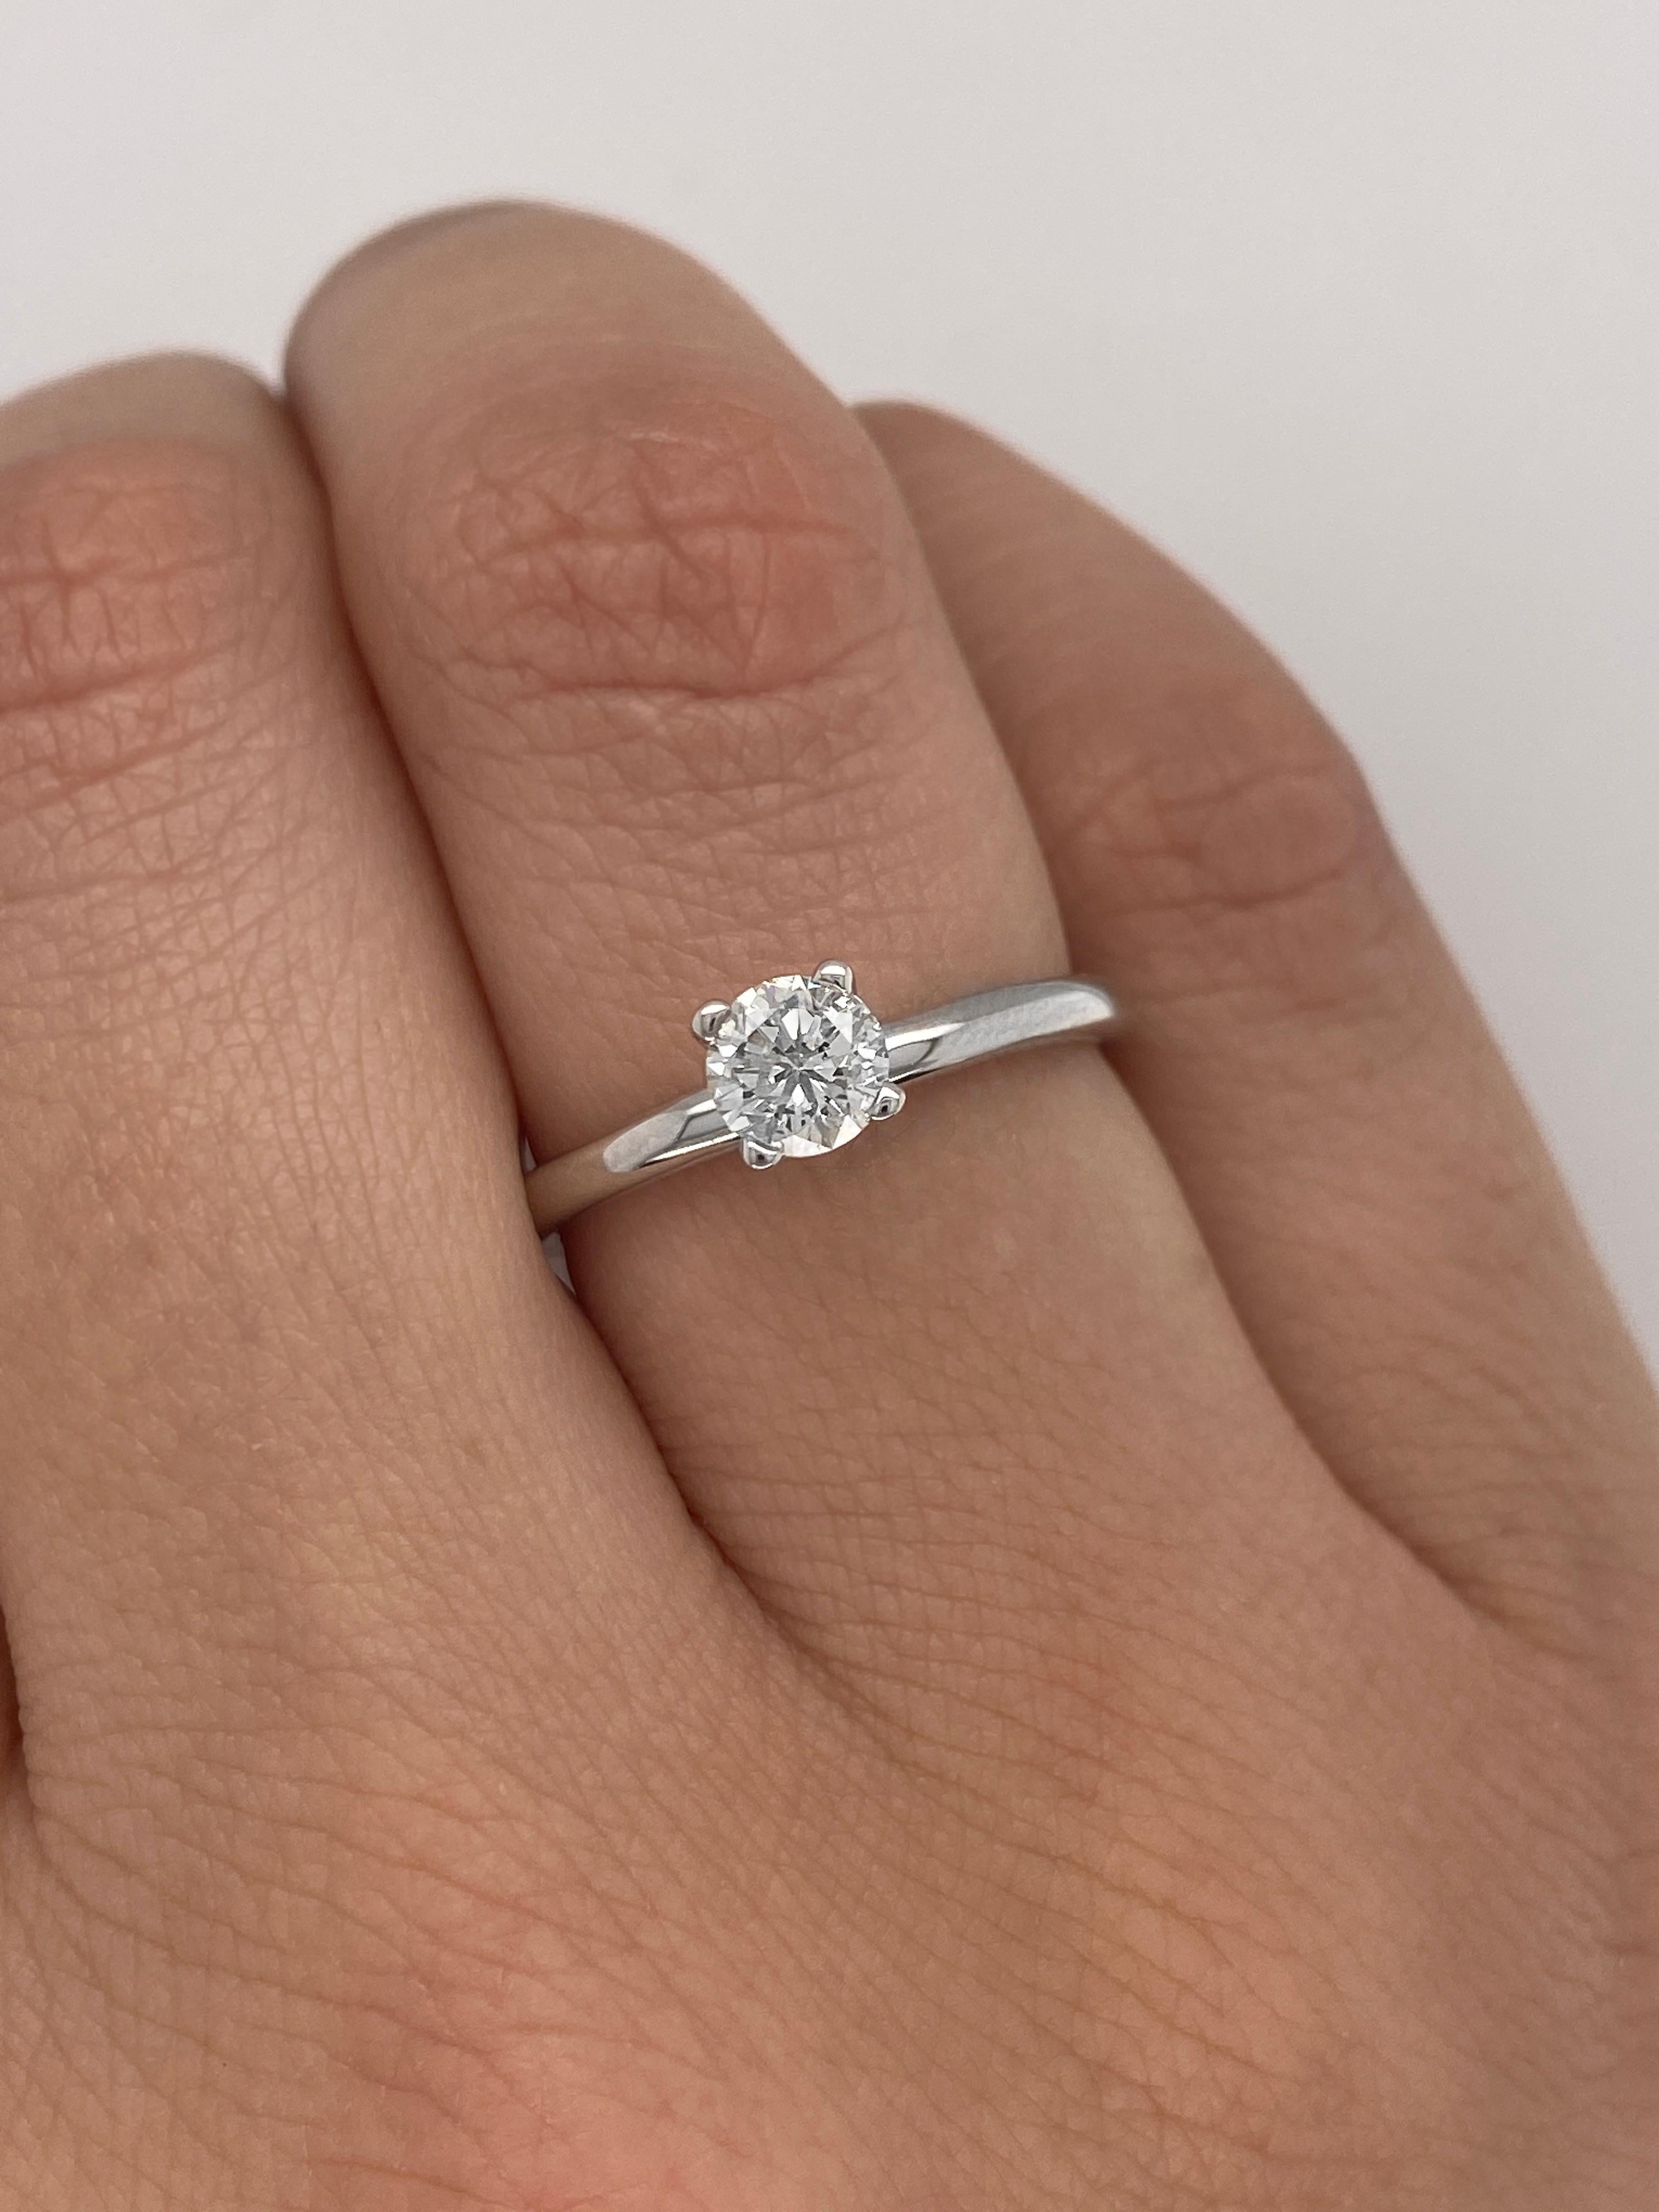 For Sale:  0.50 Ct Natural Round Cut Diamond Engagement Ring 14K White Gold 3